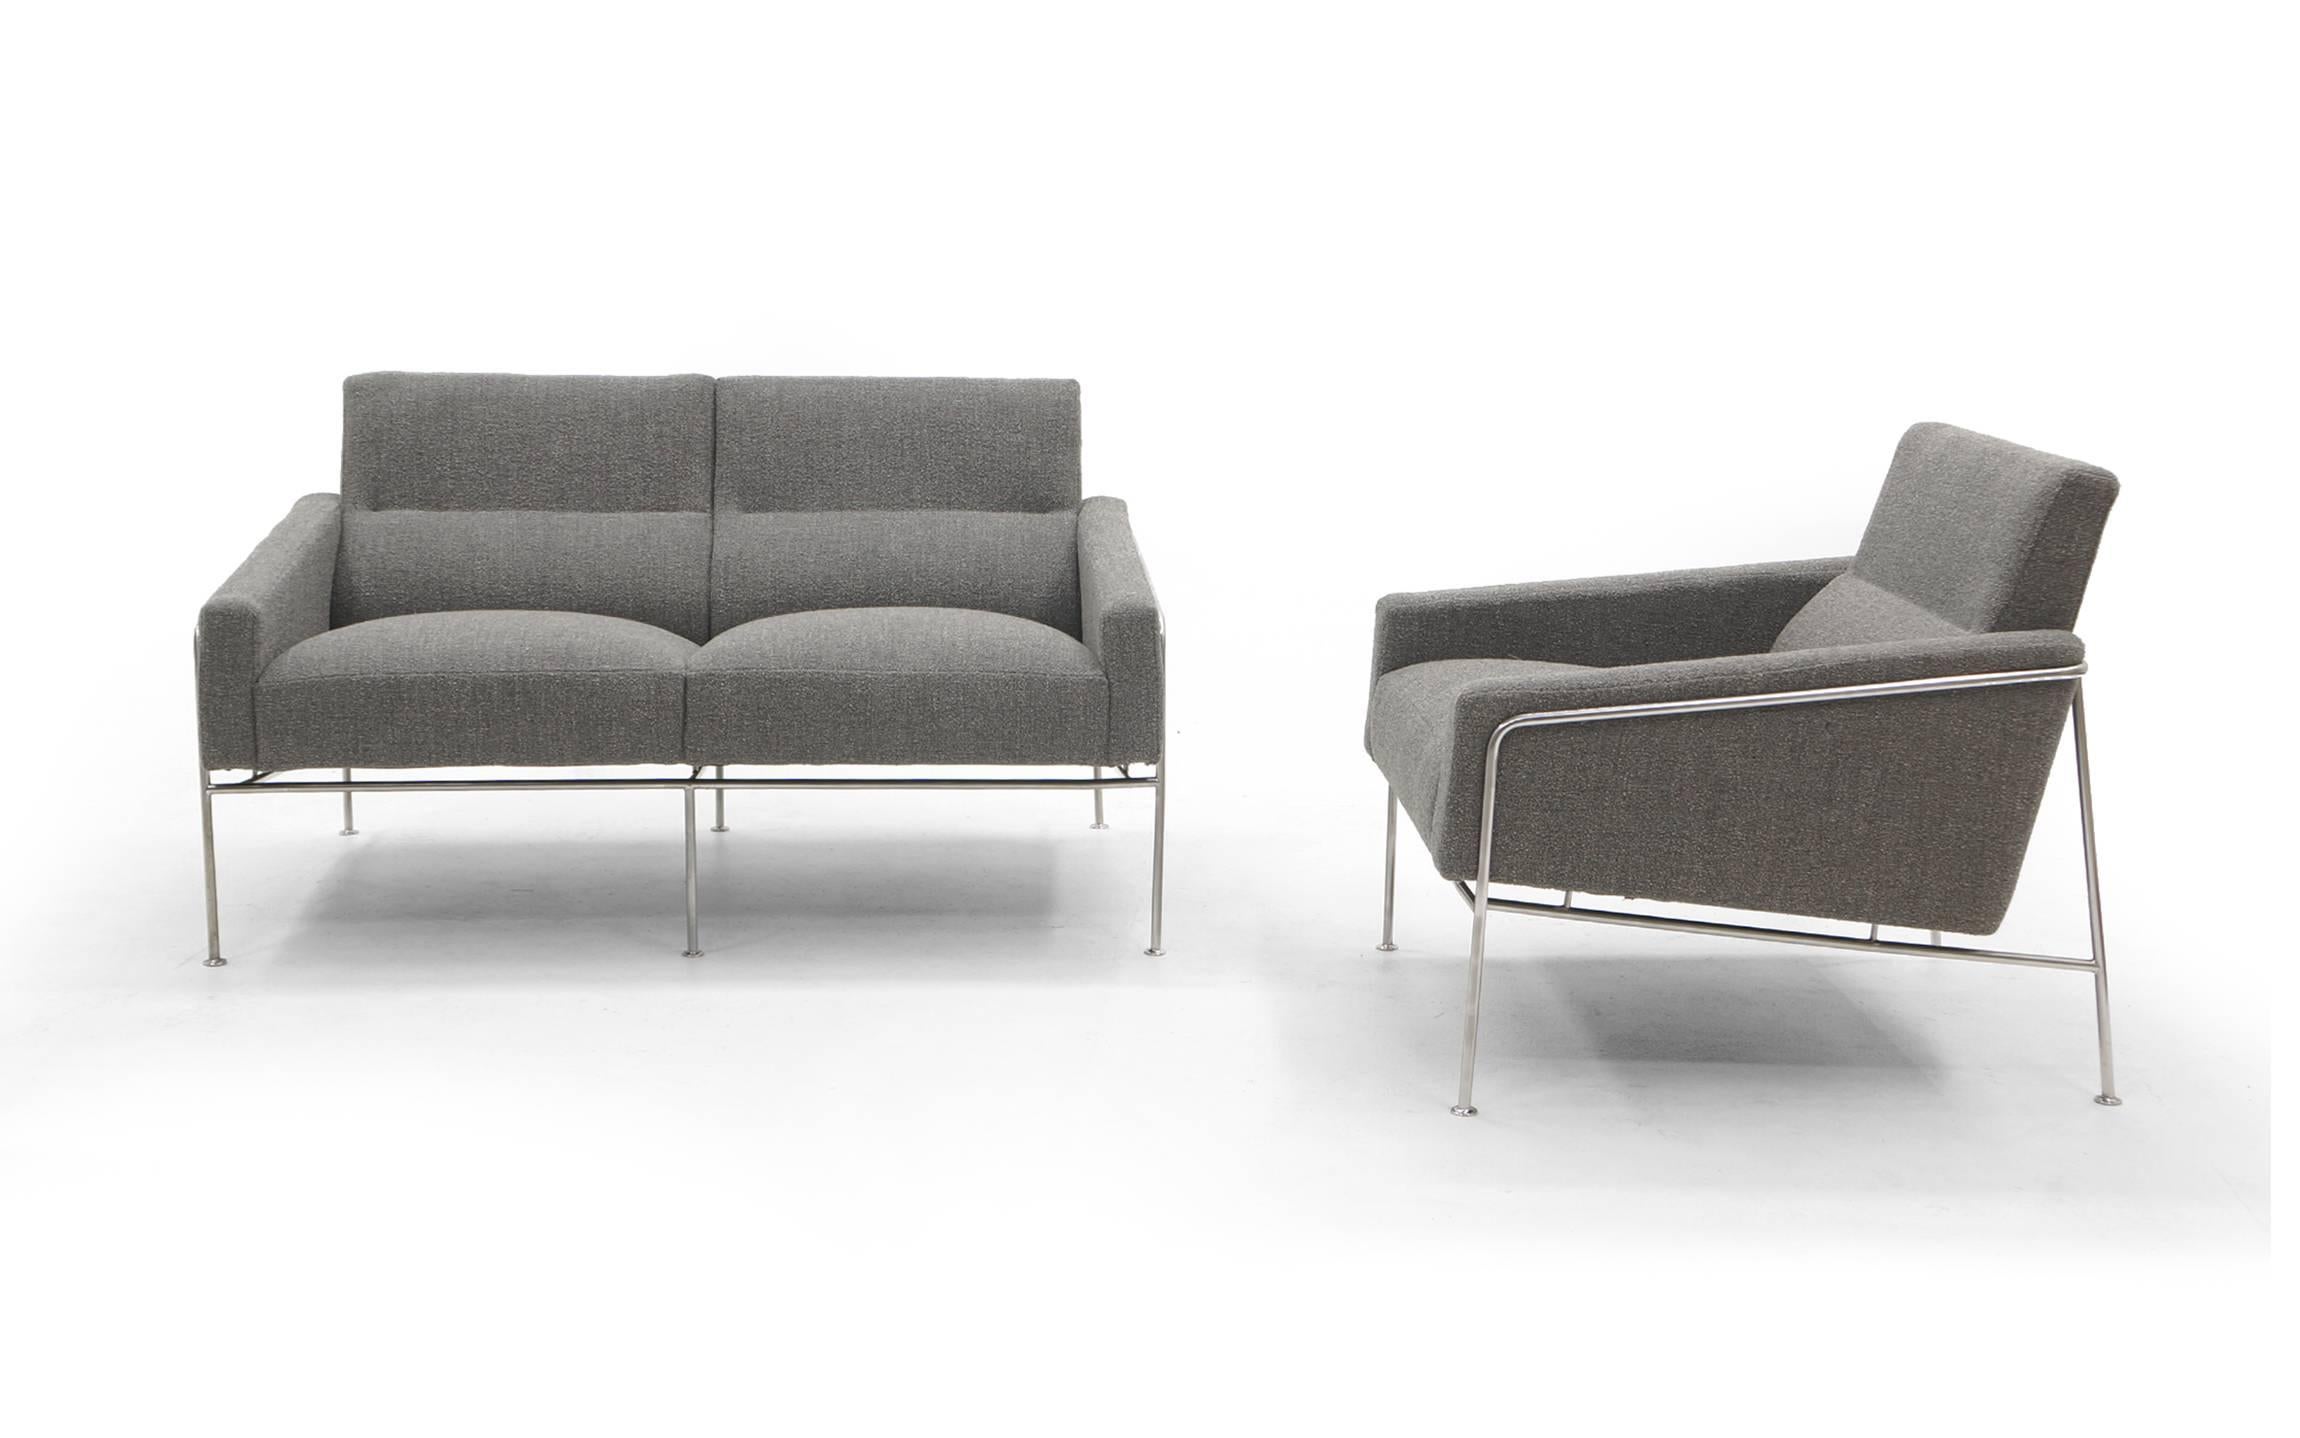 Two-seat sofa settee and chair designed by Arne Jacobsen for the SAS airport in 1957 and manufactured by Fritz Hansen, Denmark. These early examples have been fully restored and reupholstered in a soft medium gray / light charcoal grey maharam